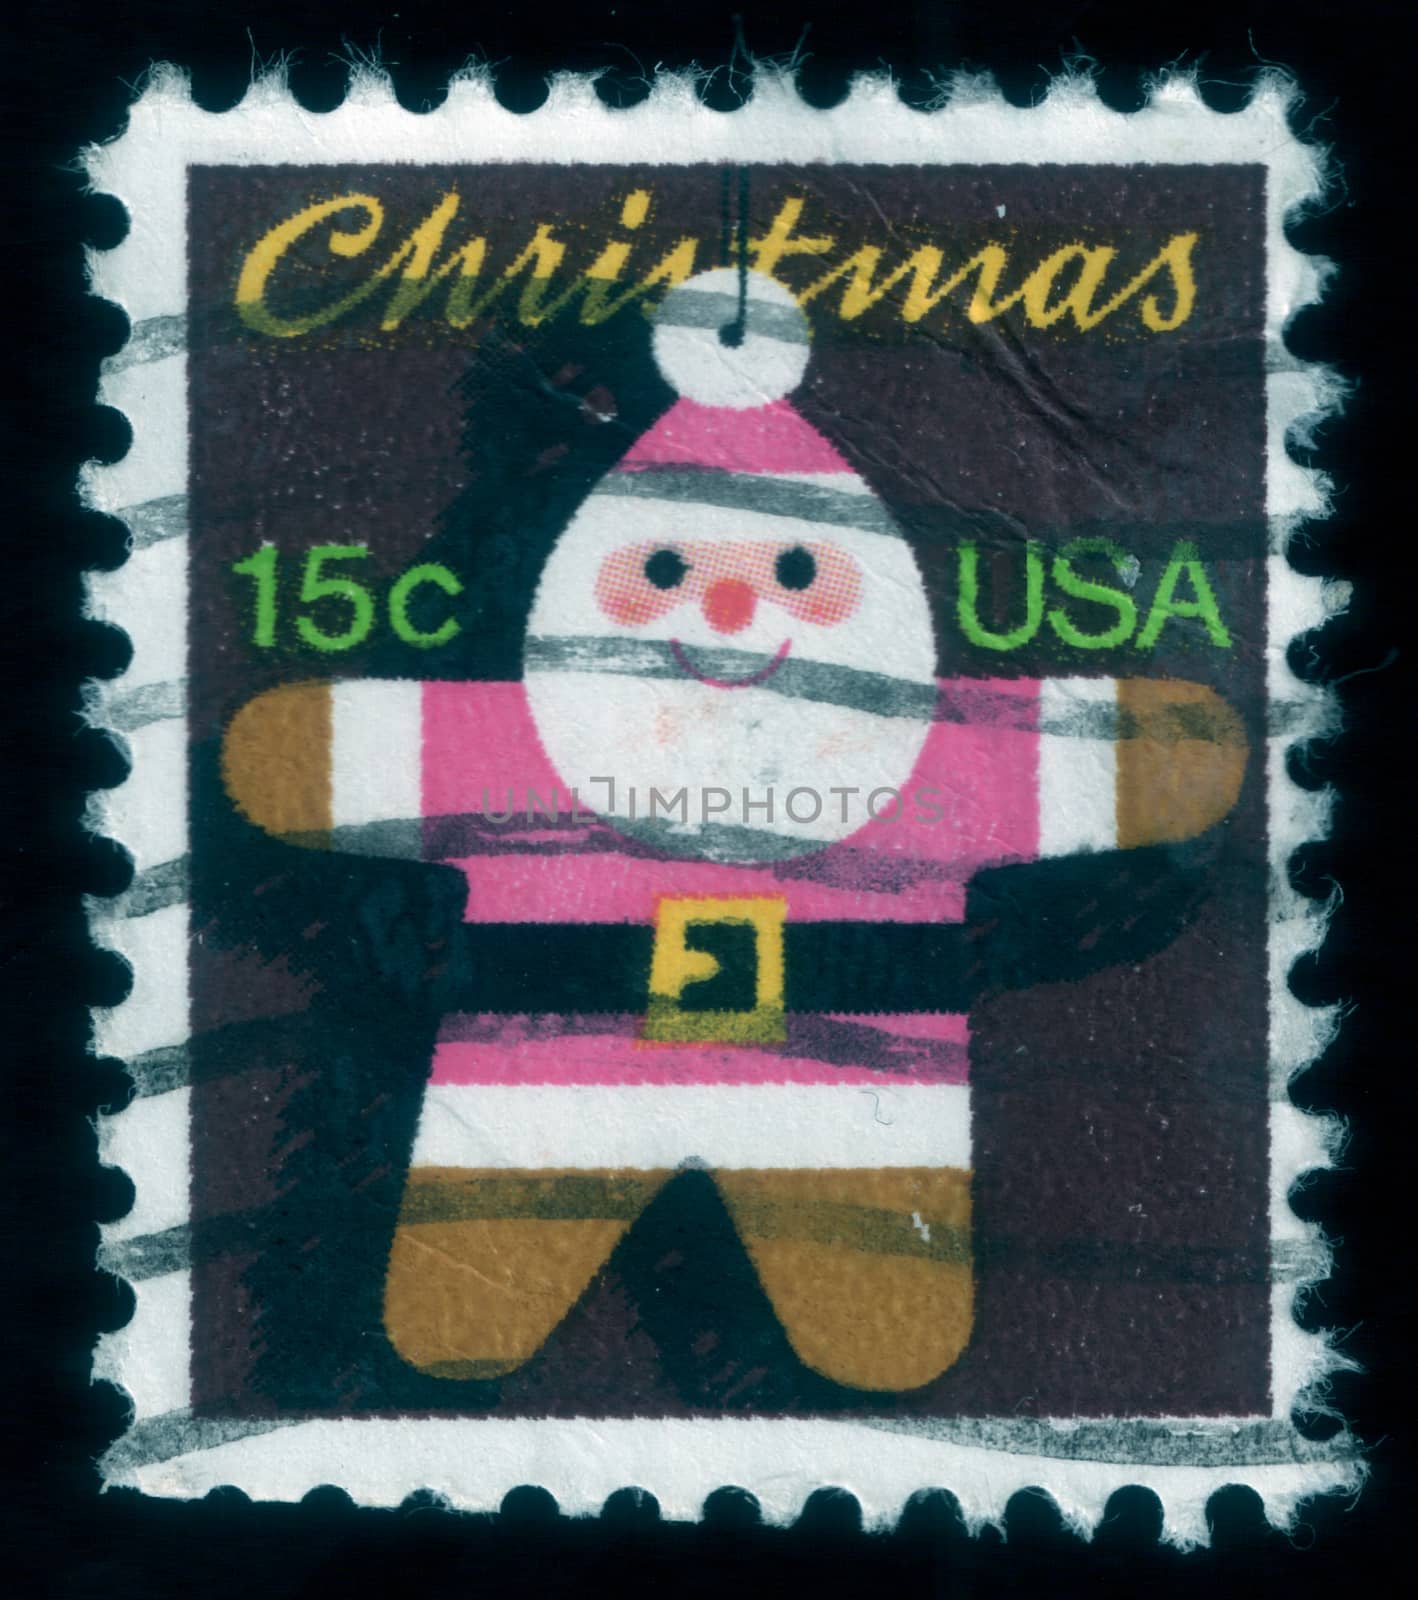 Father Christmas - Santa Claus picture. USA postage stamp, uploaded in 2014